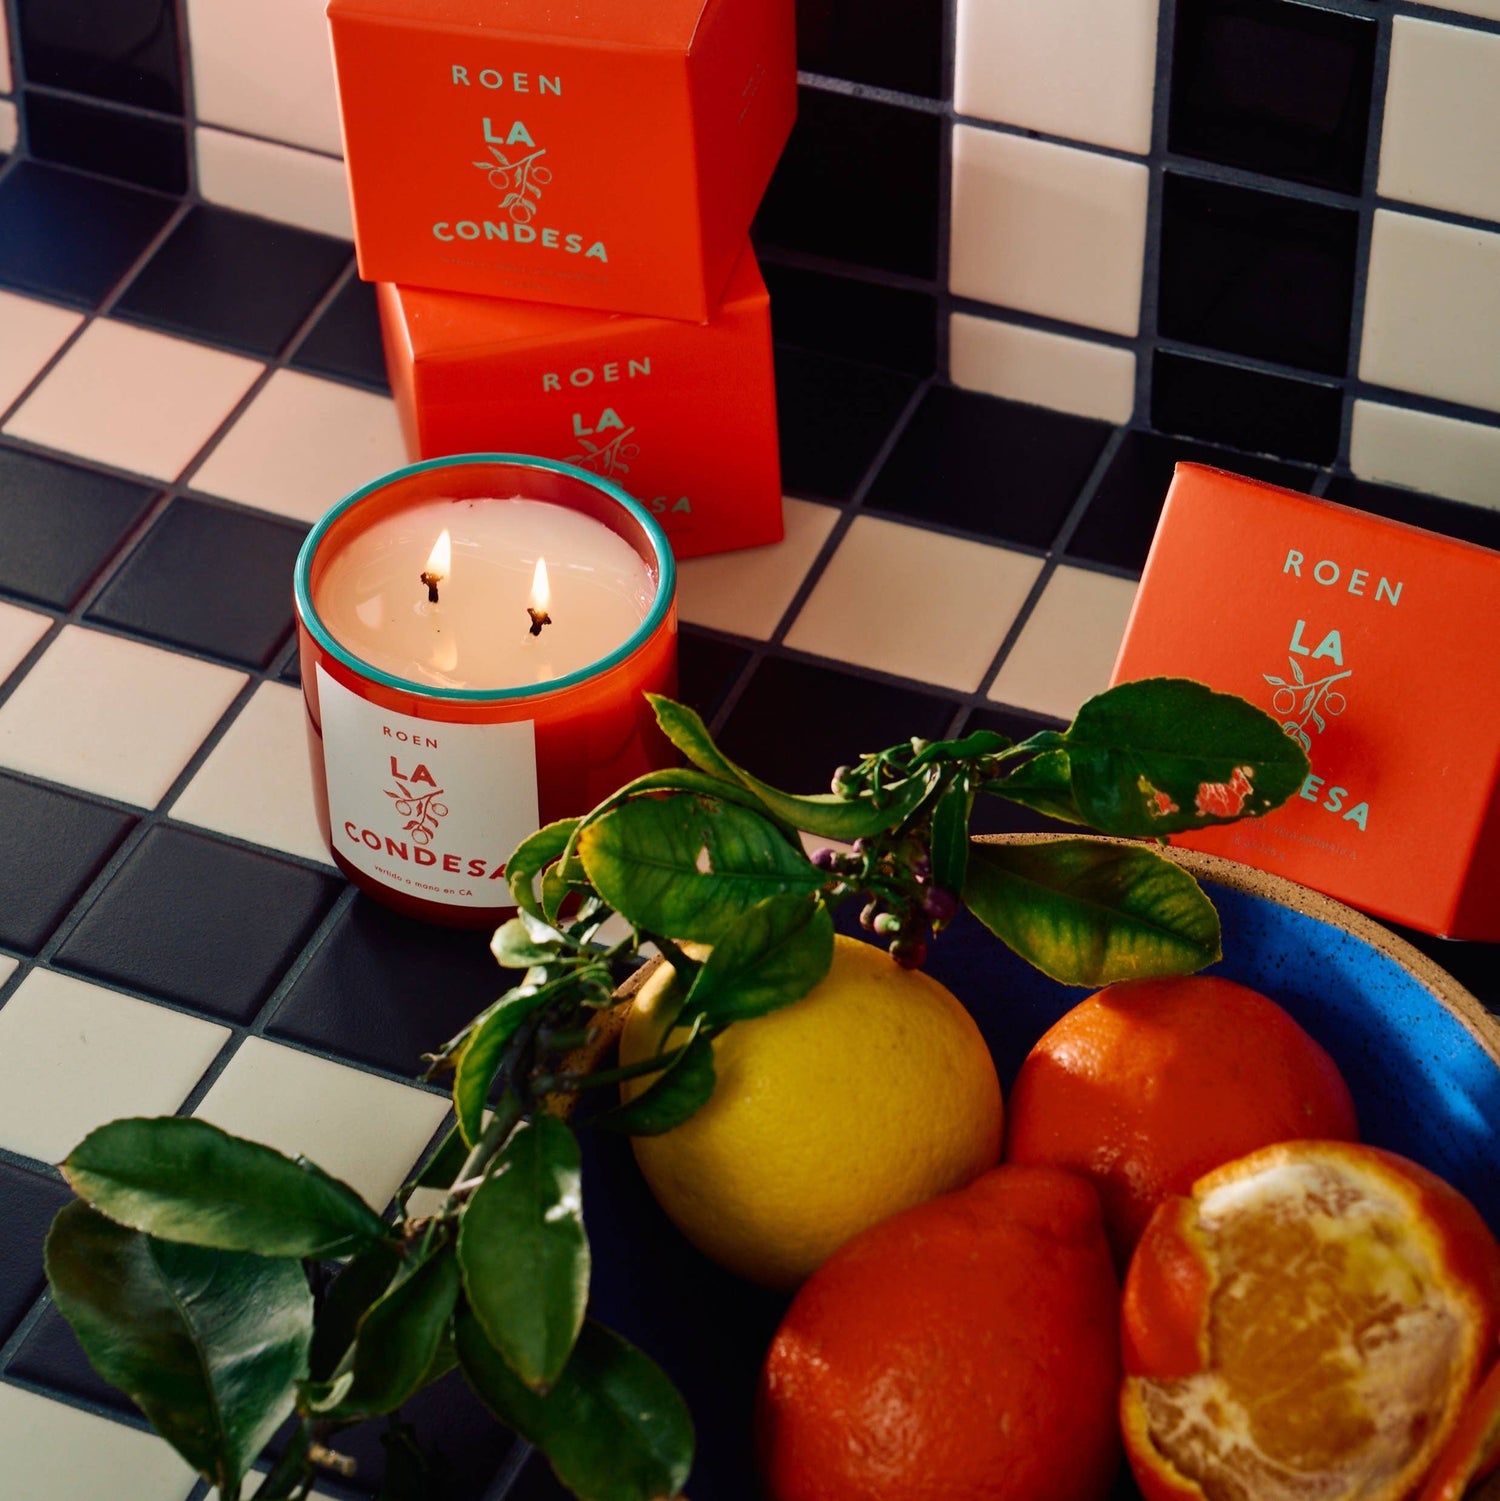 Discover the latest scented candles from across the world at Osmology